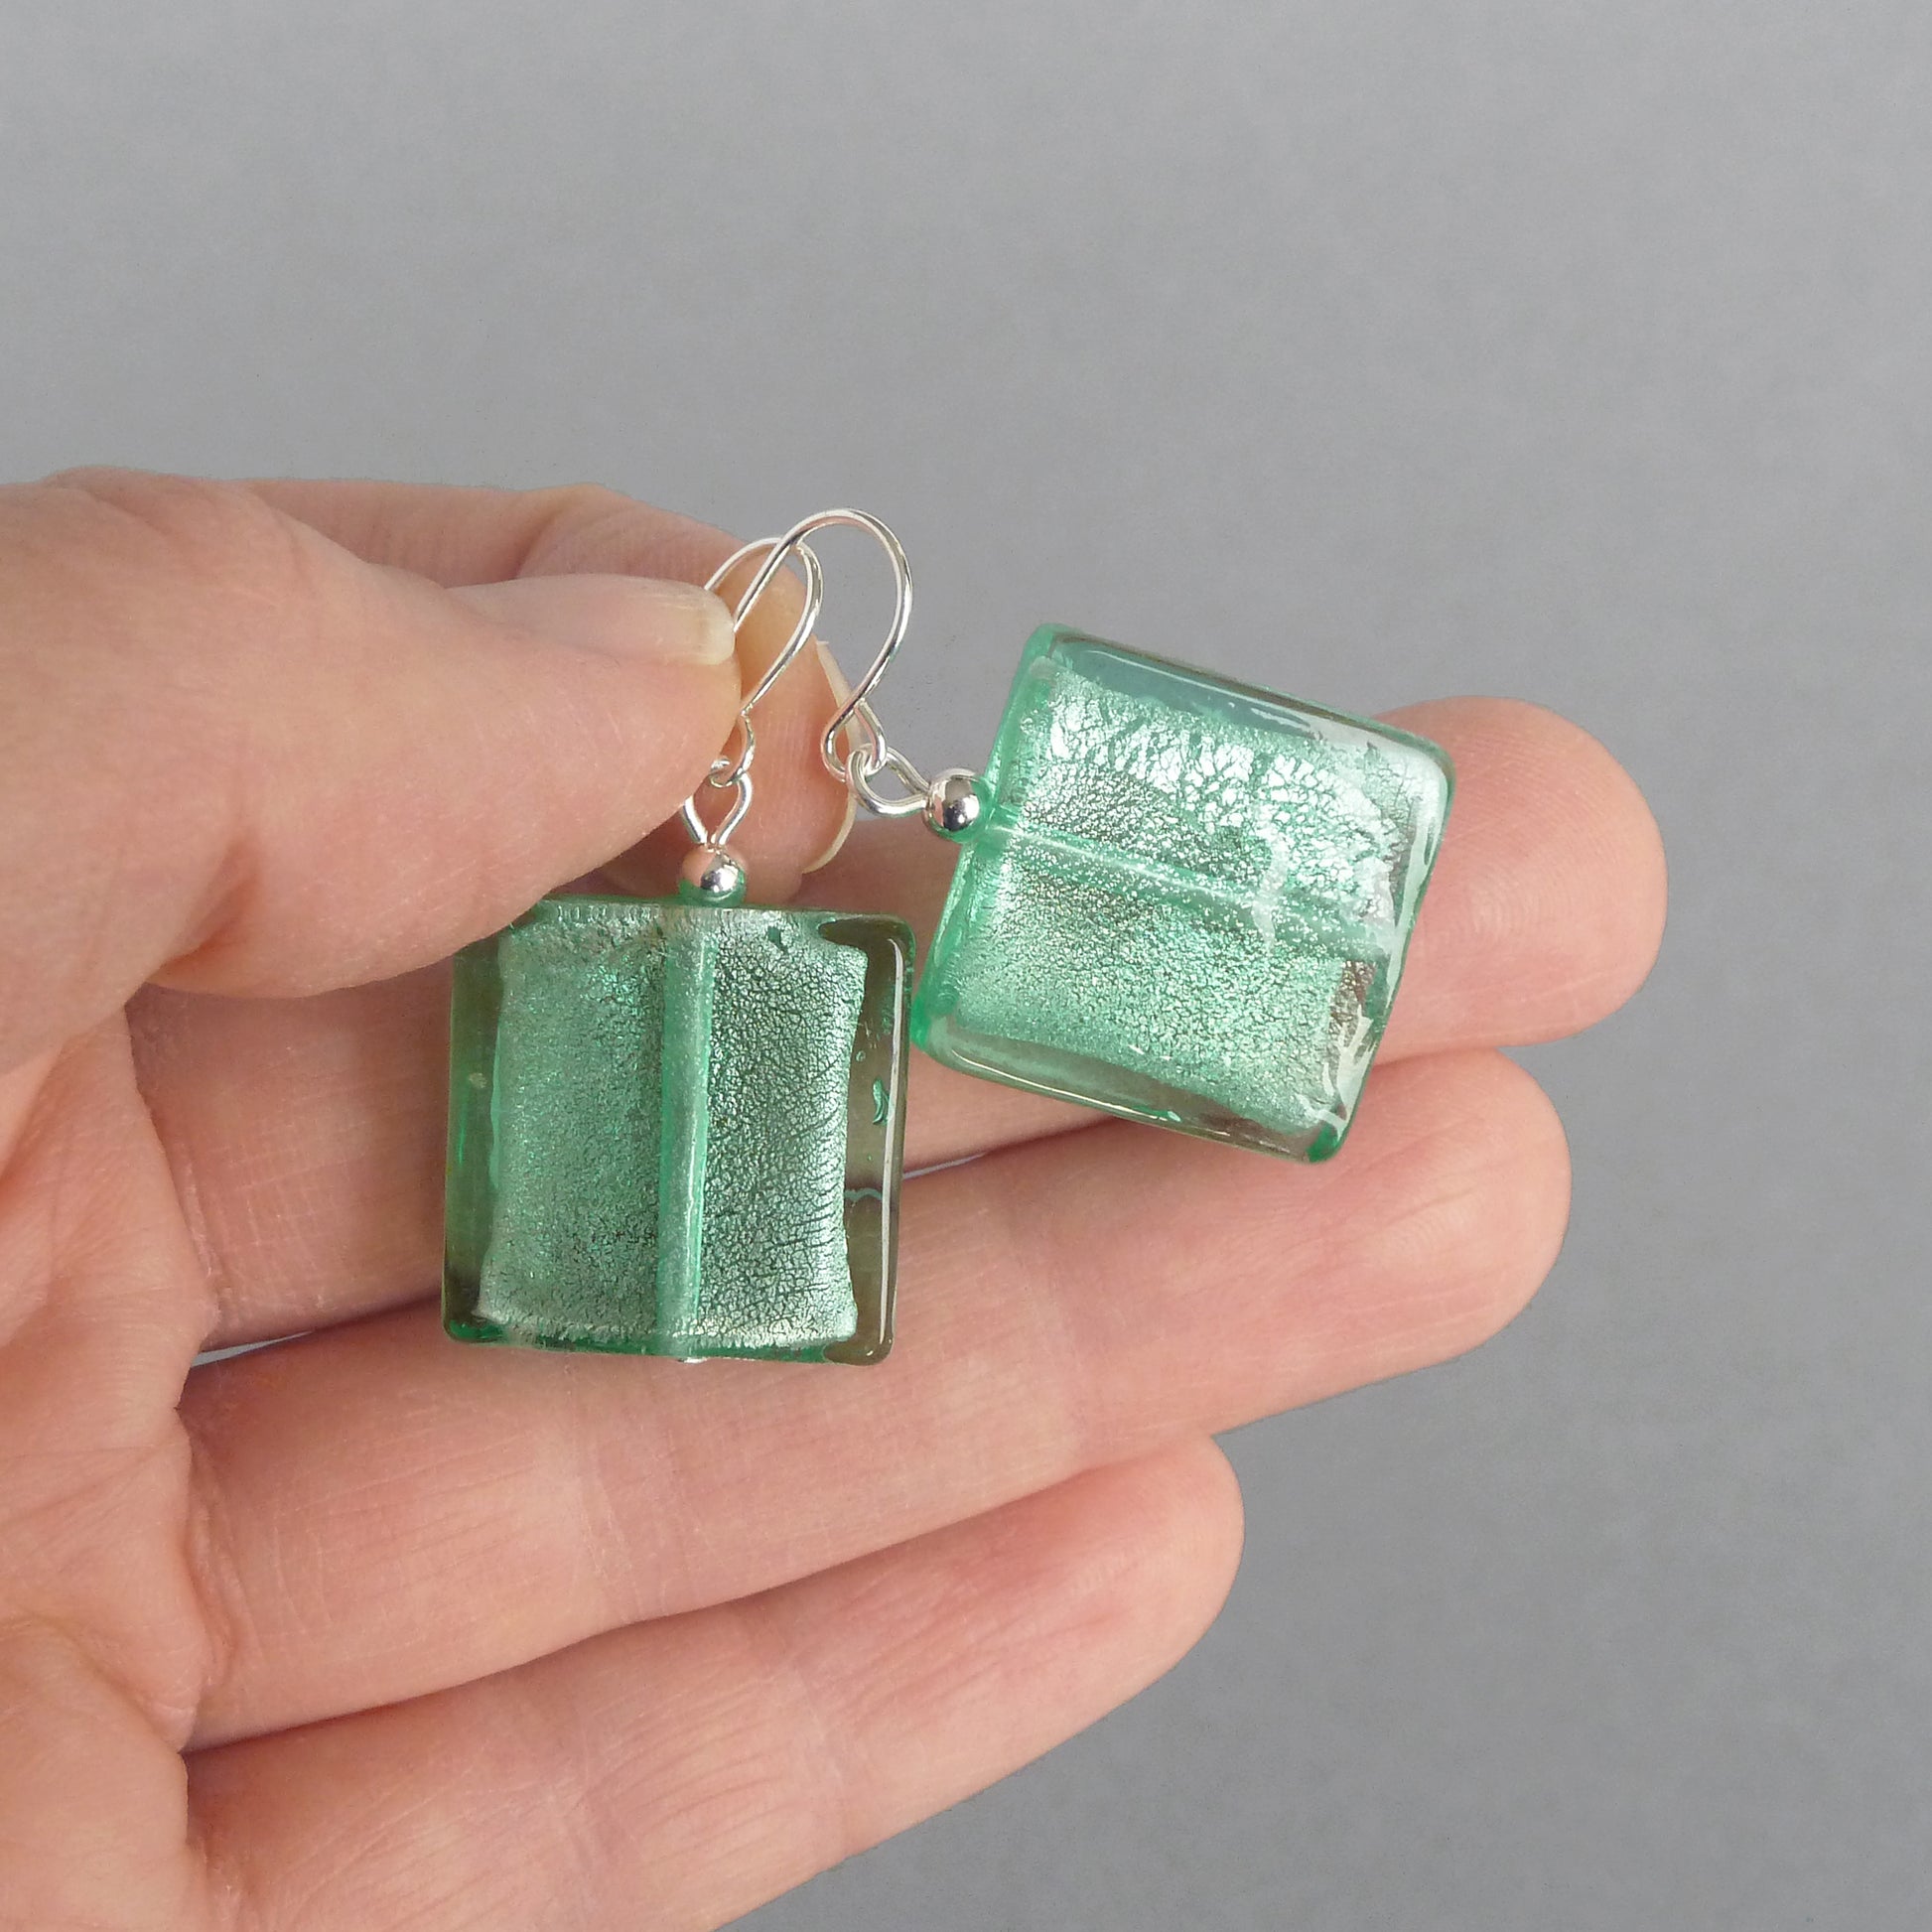 Big turquoise square glass earrings